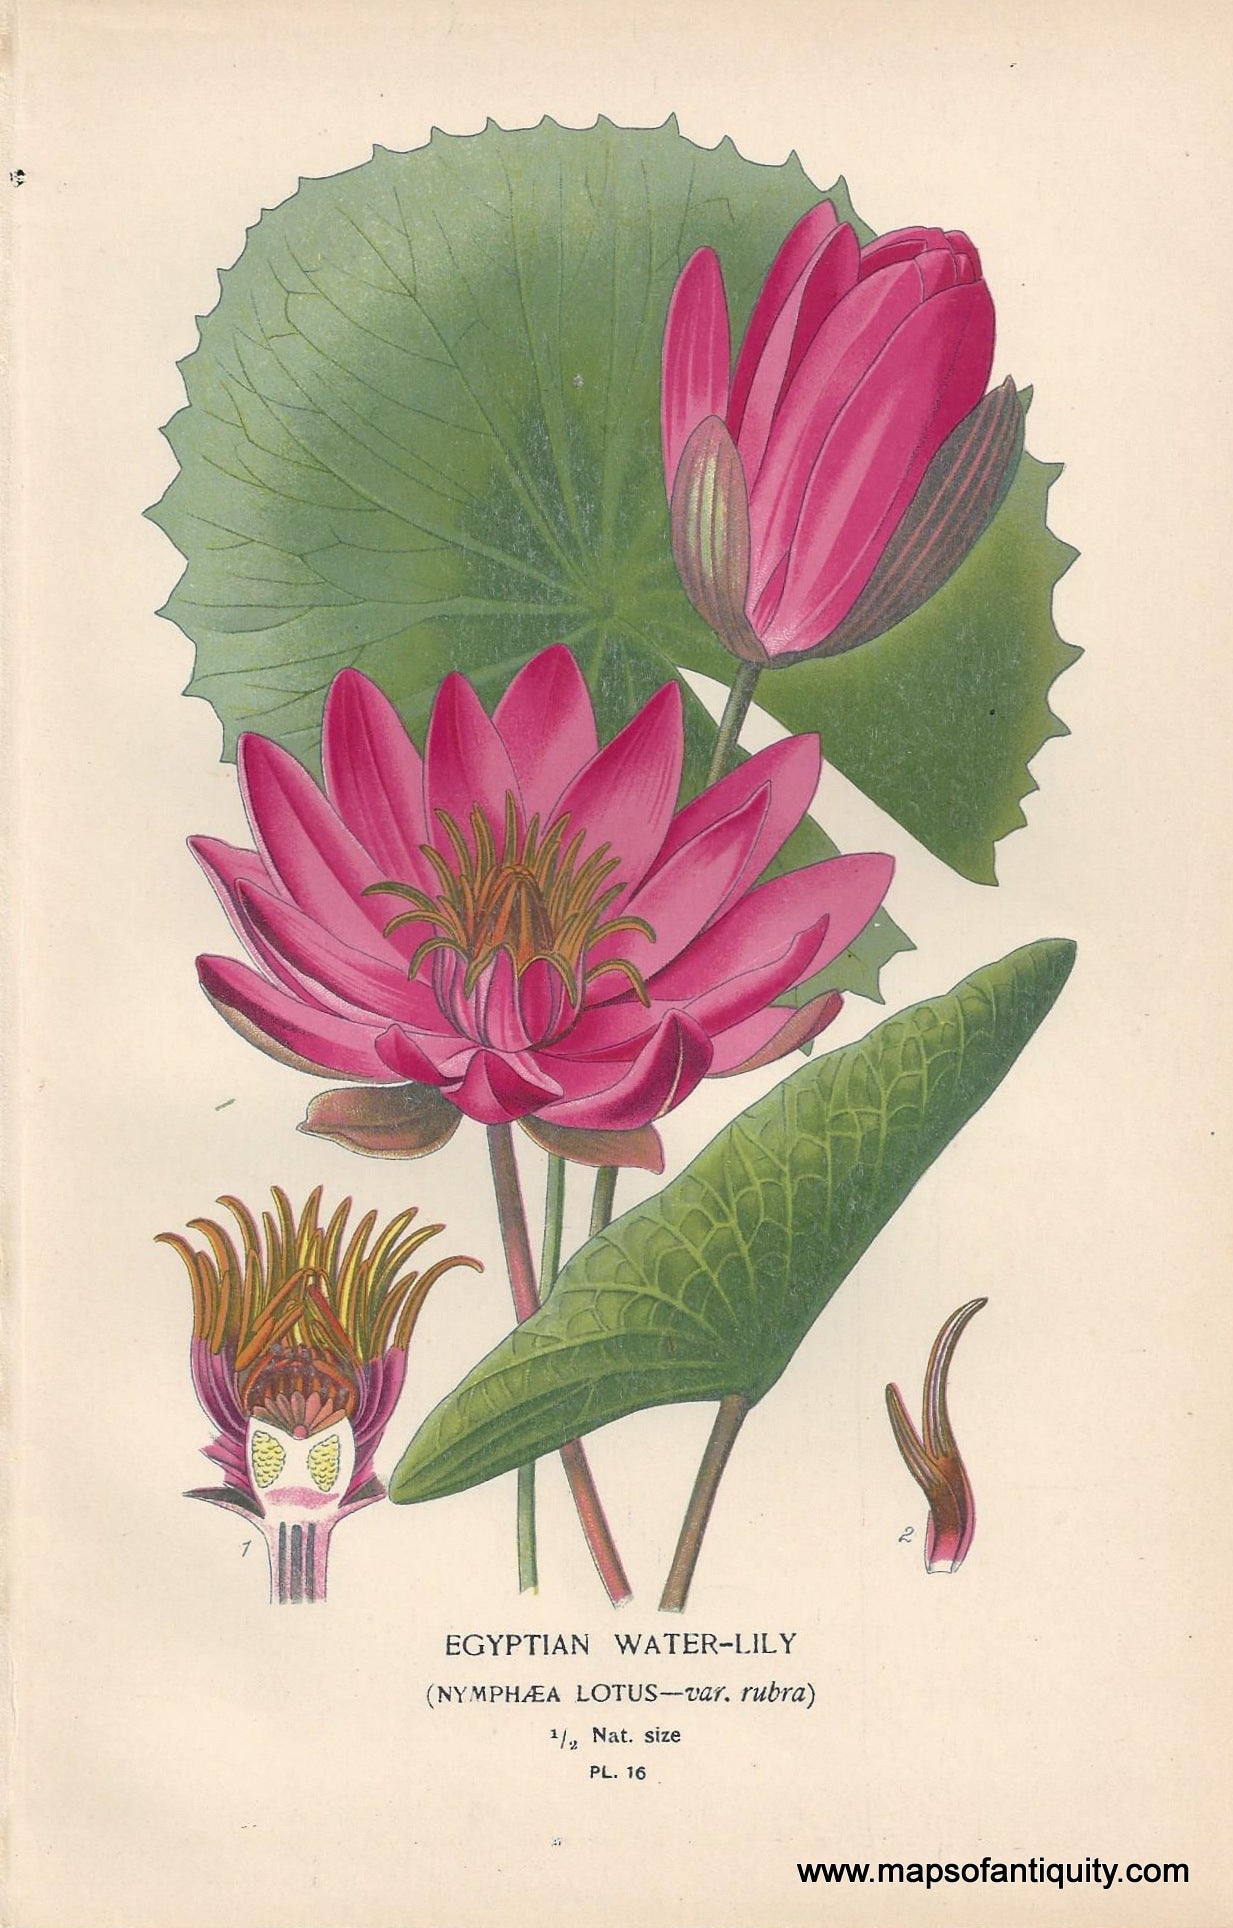 Genuine-Antique-Print-Egyptian-Water-Lily-Nymphaea-Lotus---var-rubra--1896--Maps-Of-Antiquity